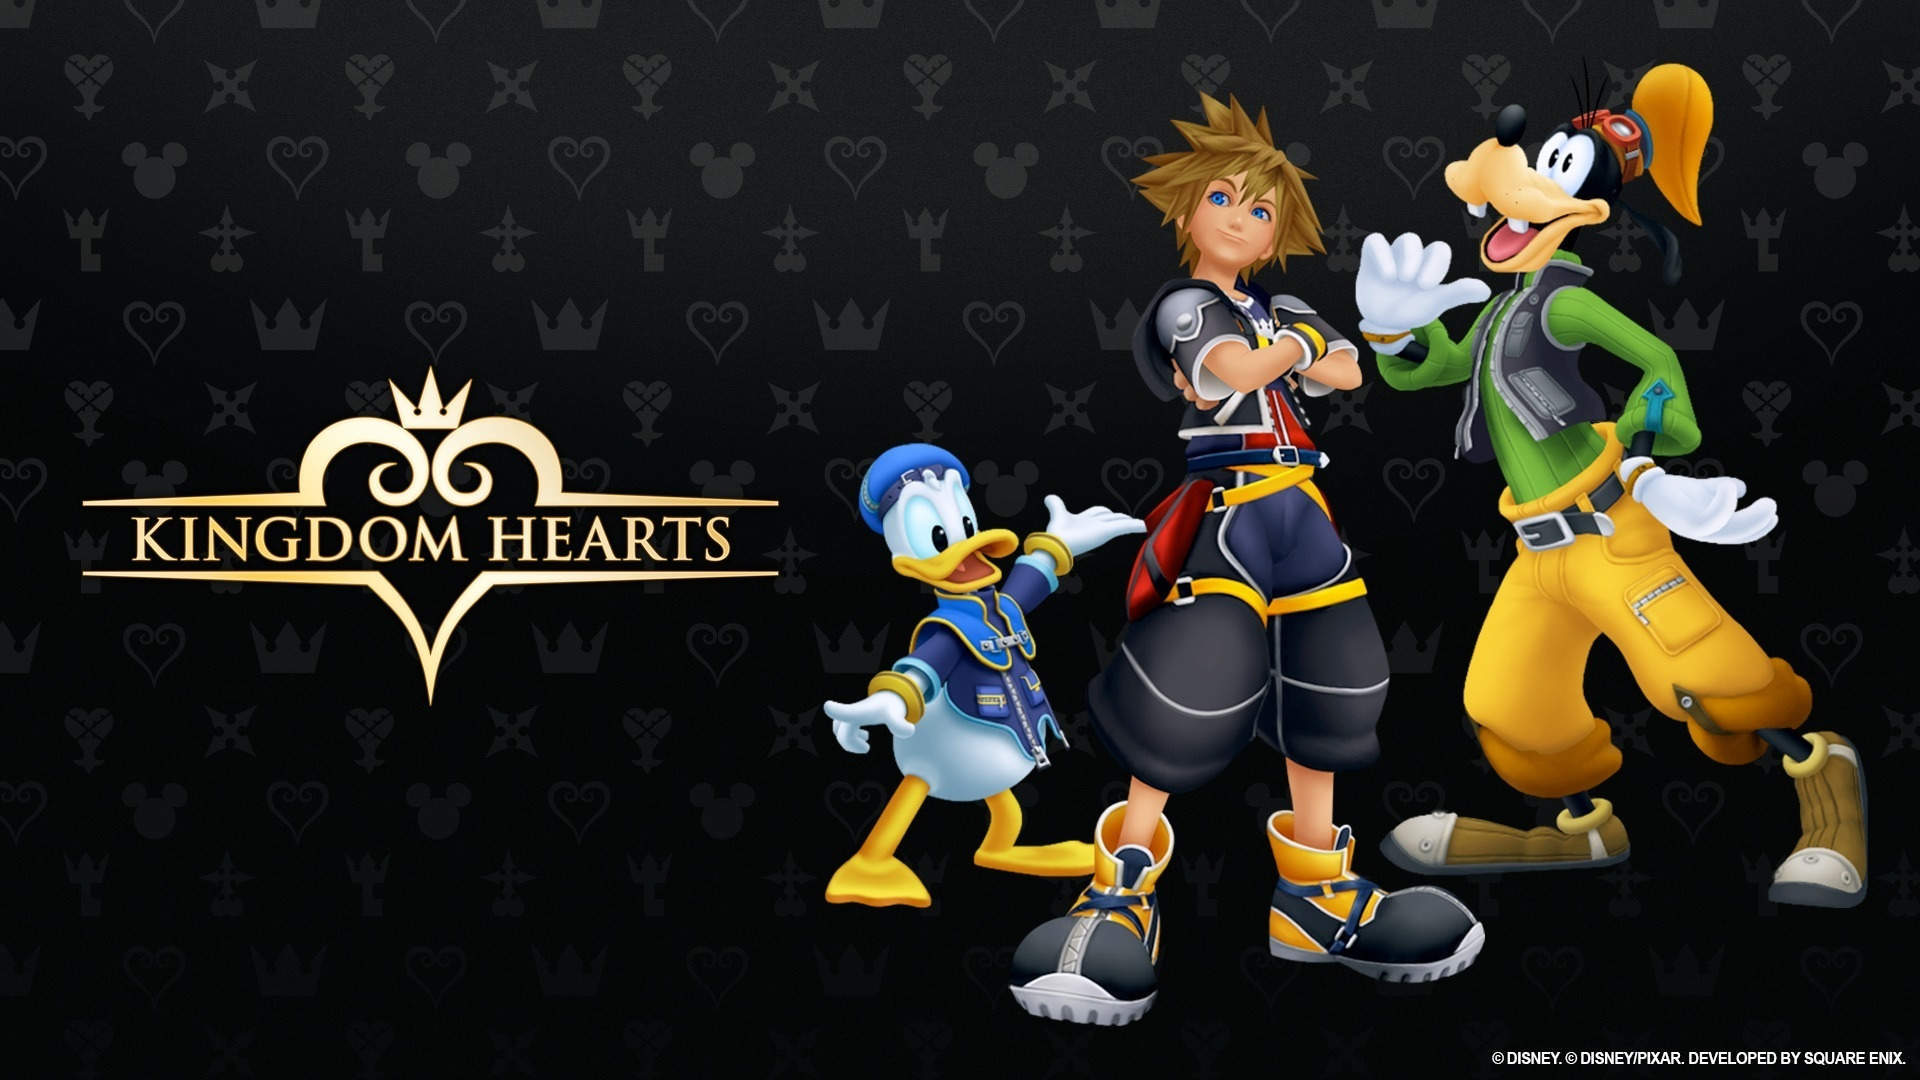 An Iconic ‘Kingdom Hearts’ Character Rounds Out The ‘Super Smash Bros. Ultimate’ Roster